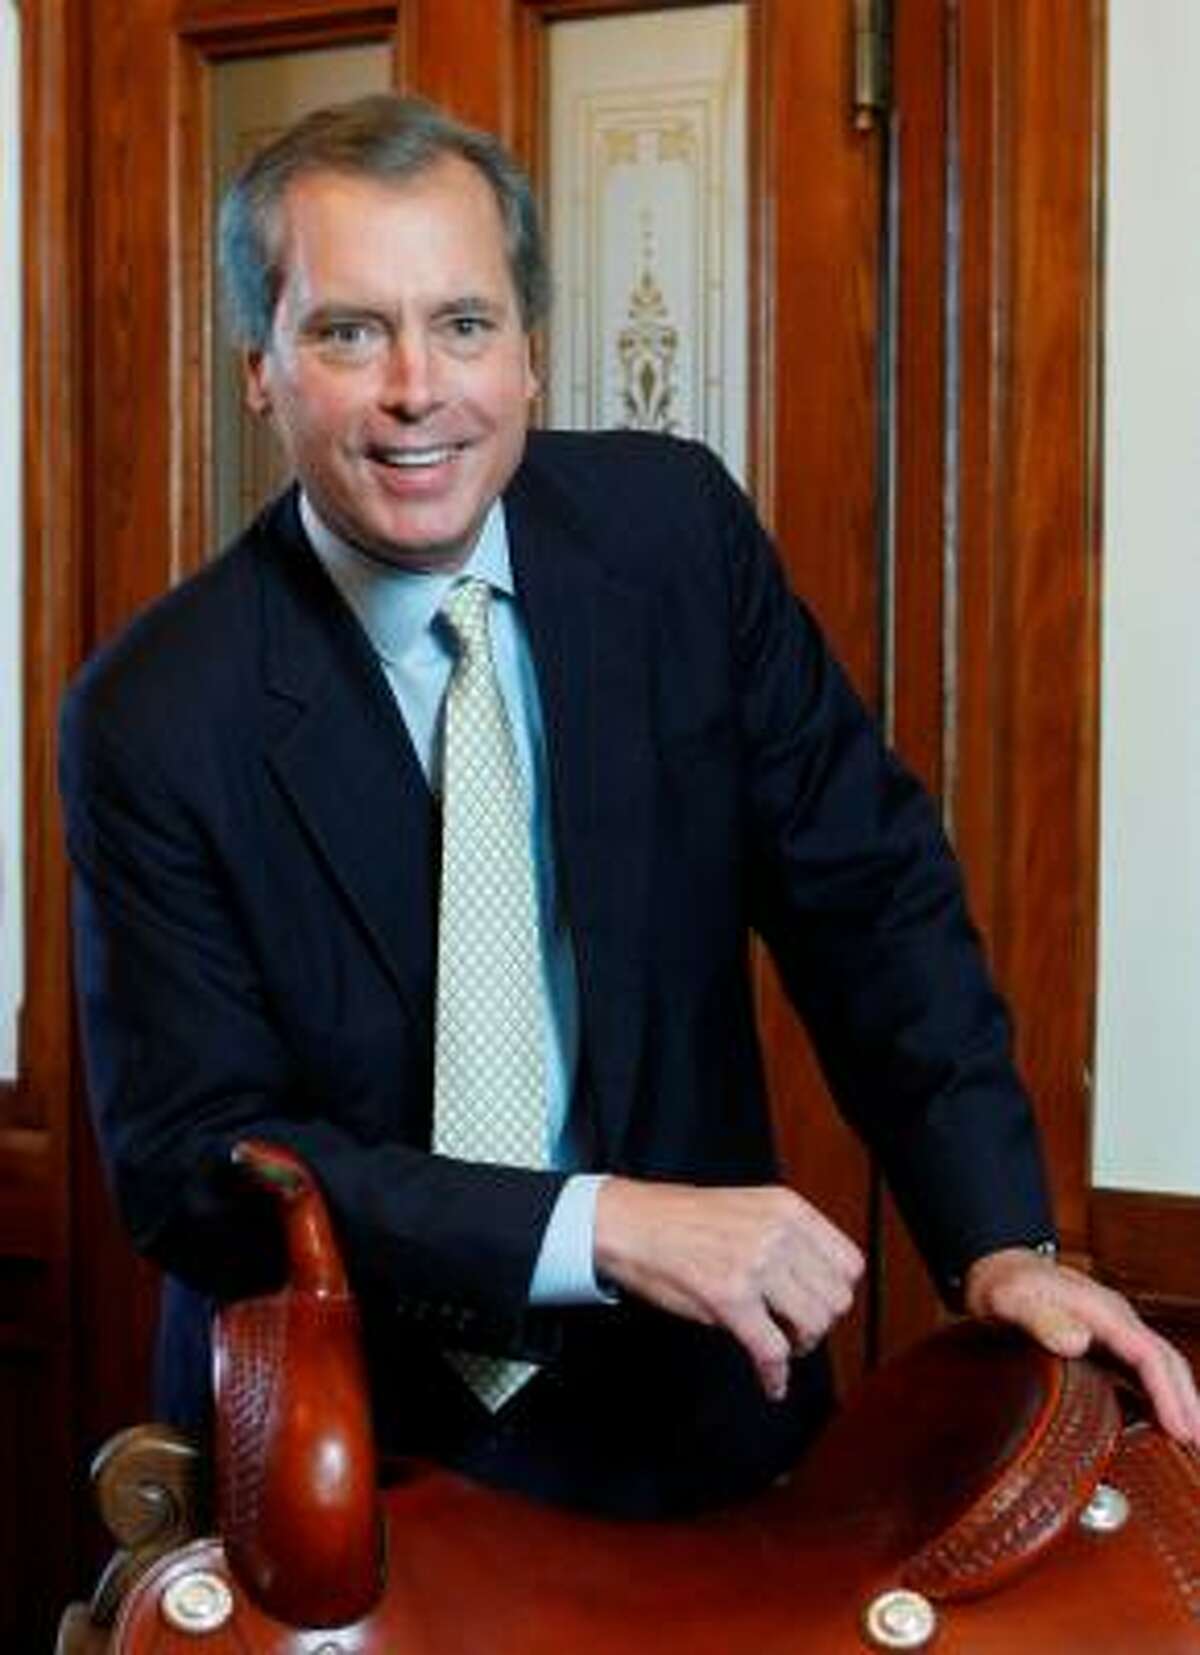 A complaint filed in Travis County says Lt. Gov. David Dewhurst is illegally hiding personal financial information.